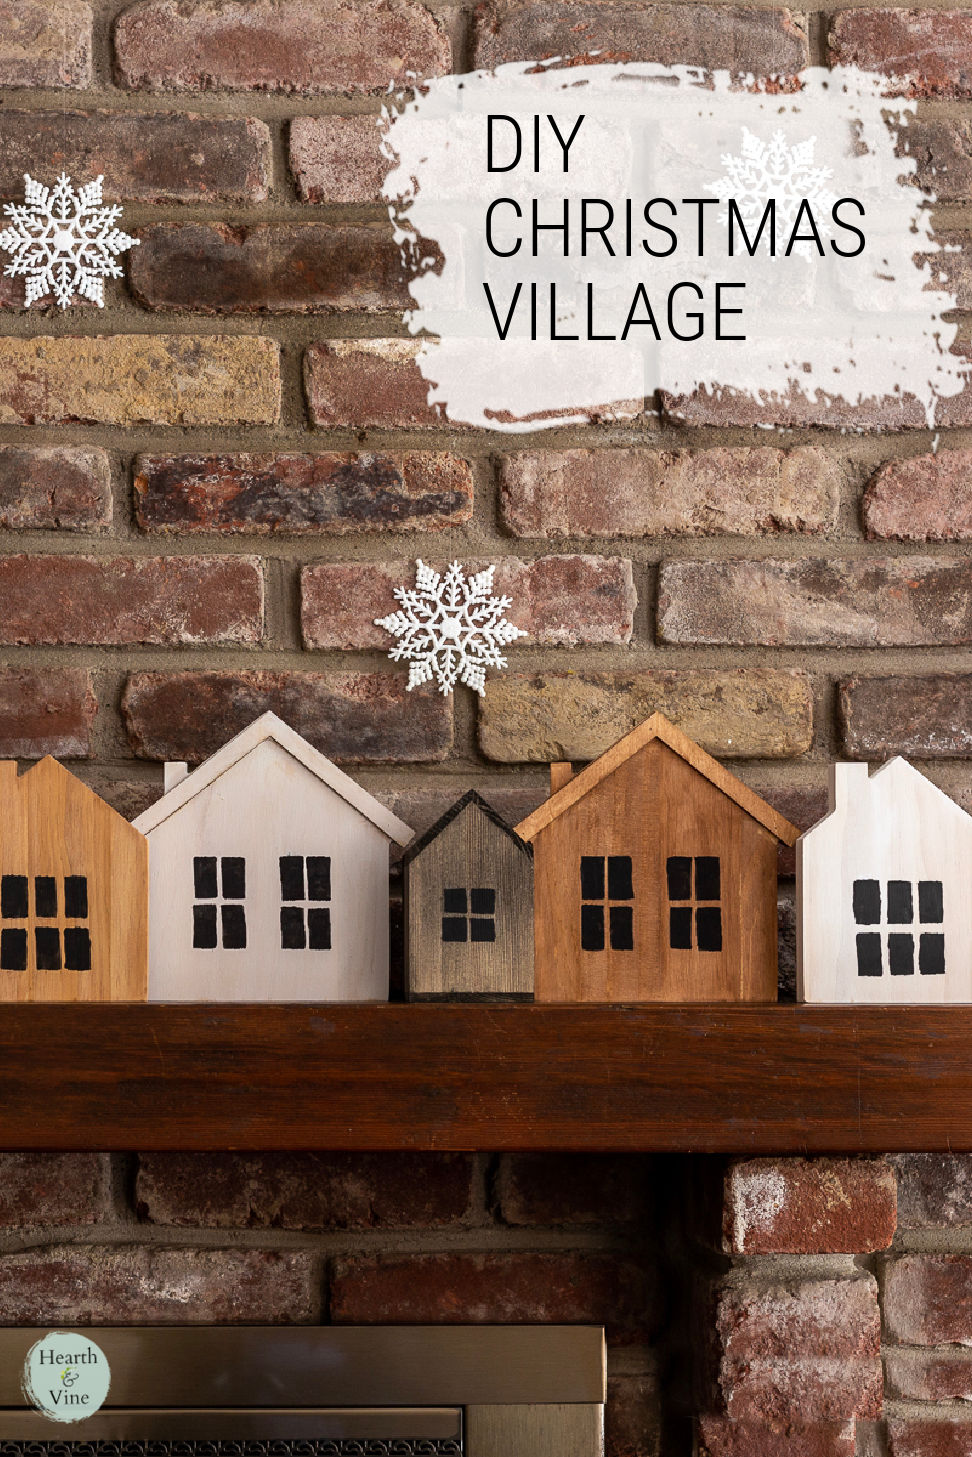 Wooden houses on mantel with snowflakes hanging from above.